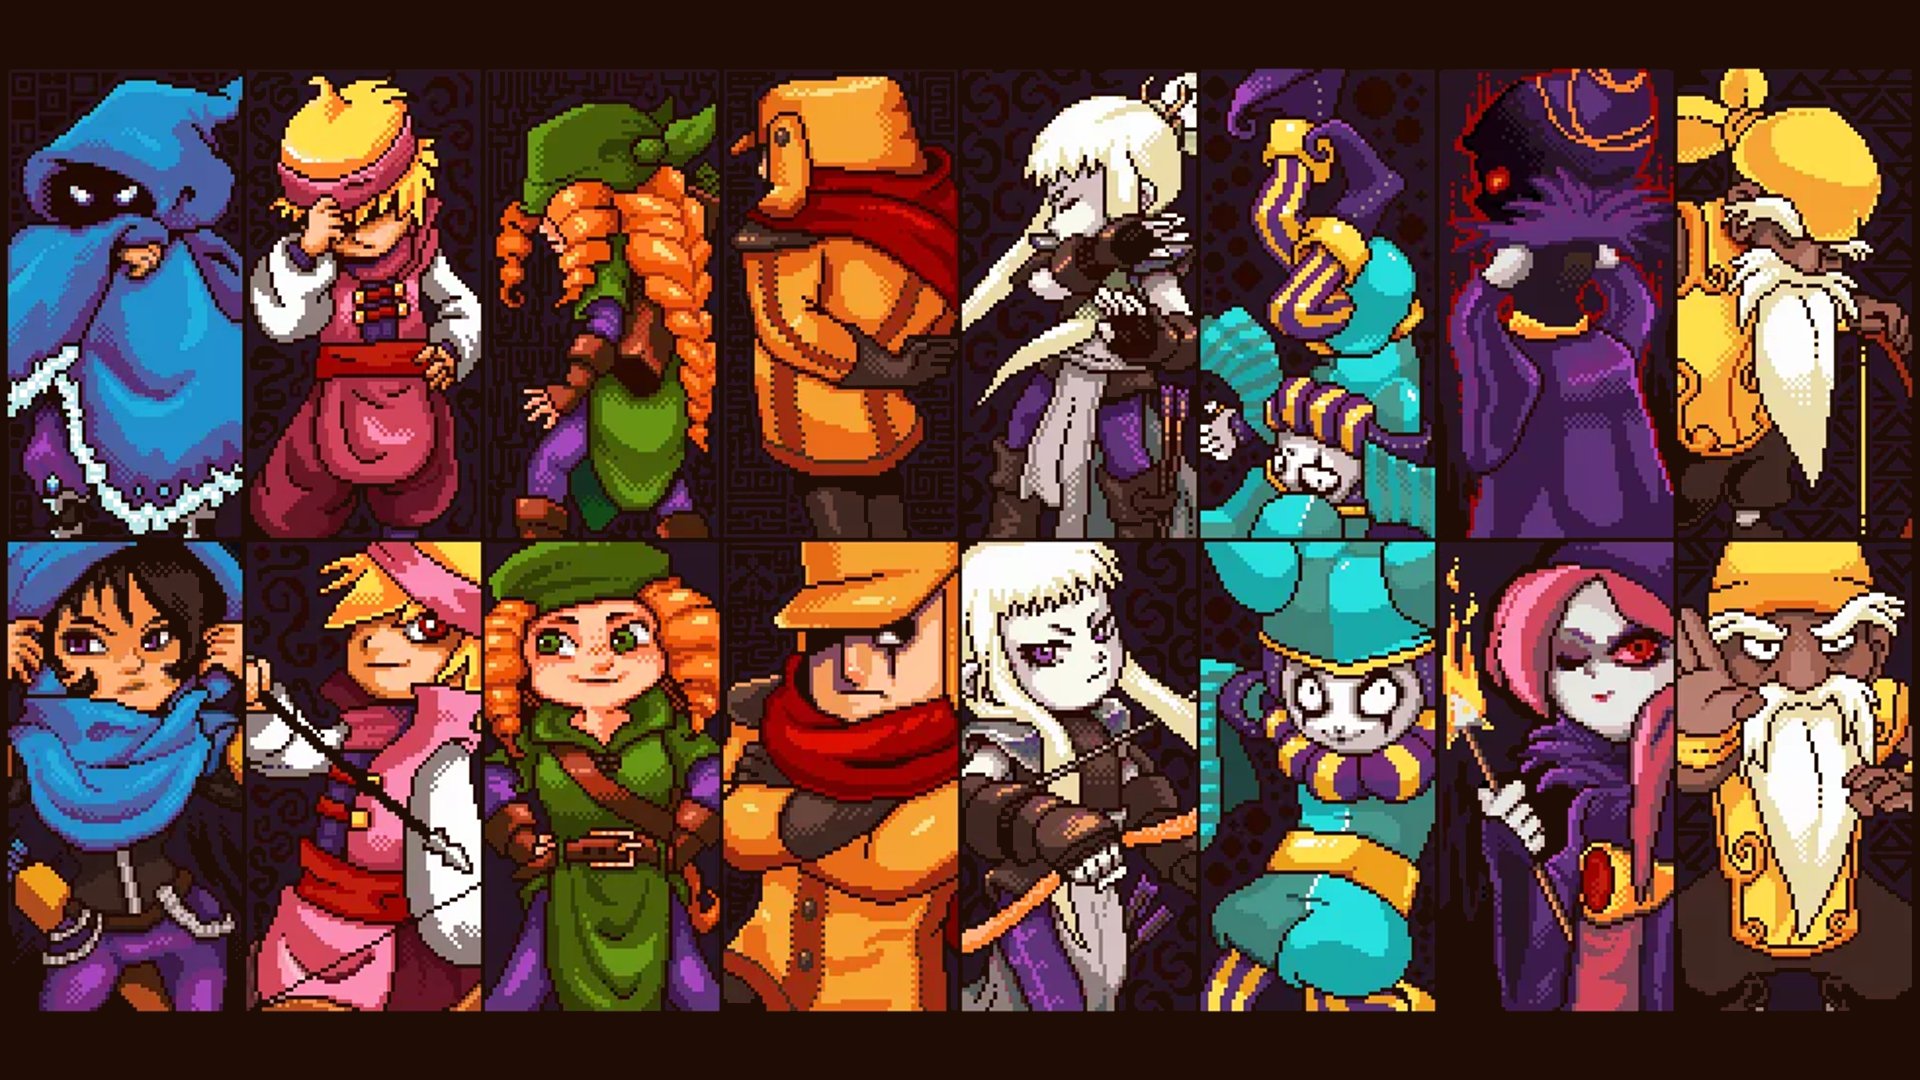 Towerfall Ascension HD Wallpaper Background Image